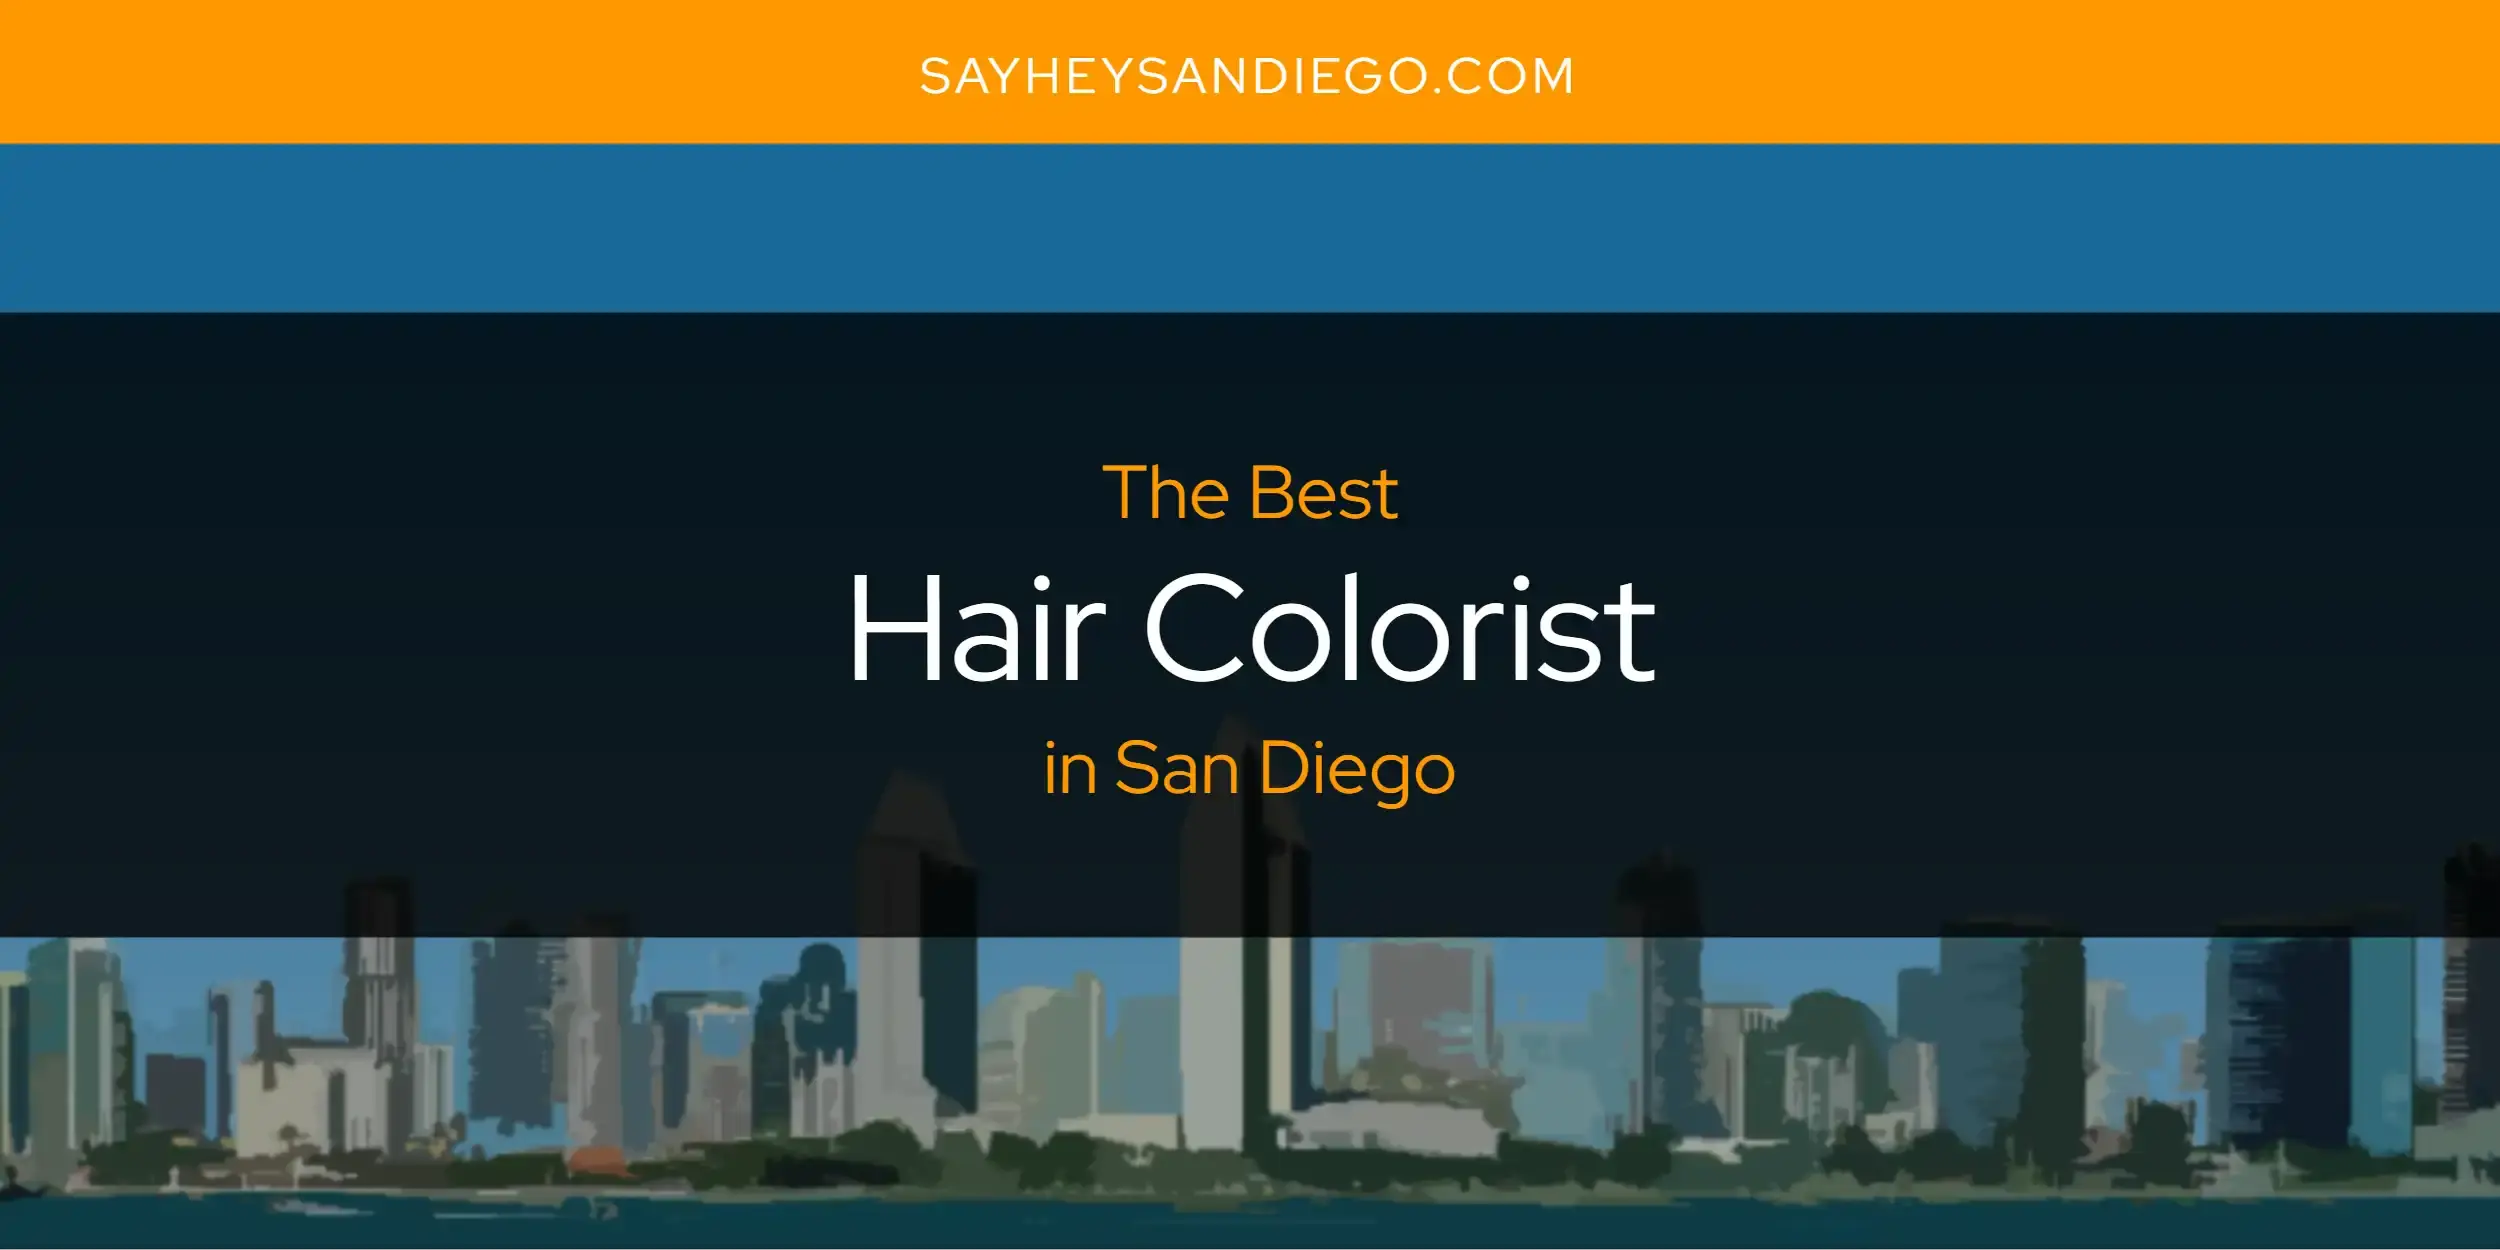 Best Hair Colorist in San Diego? Here's the Top 13